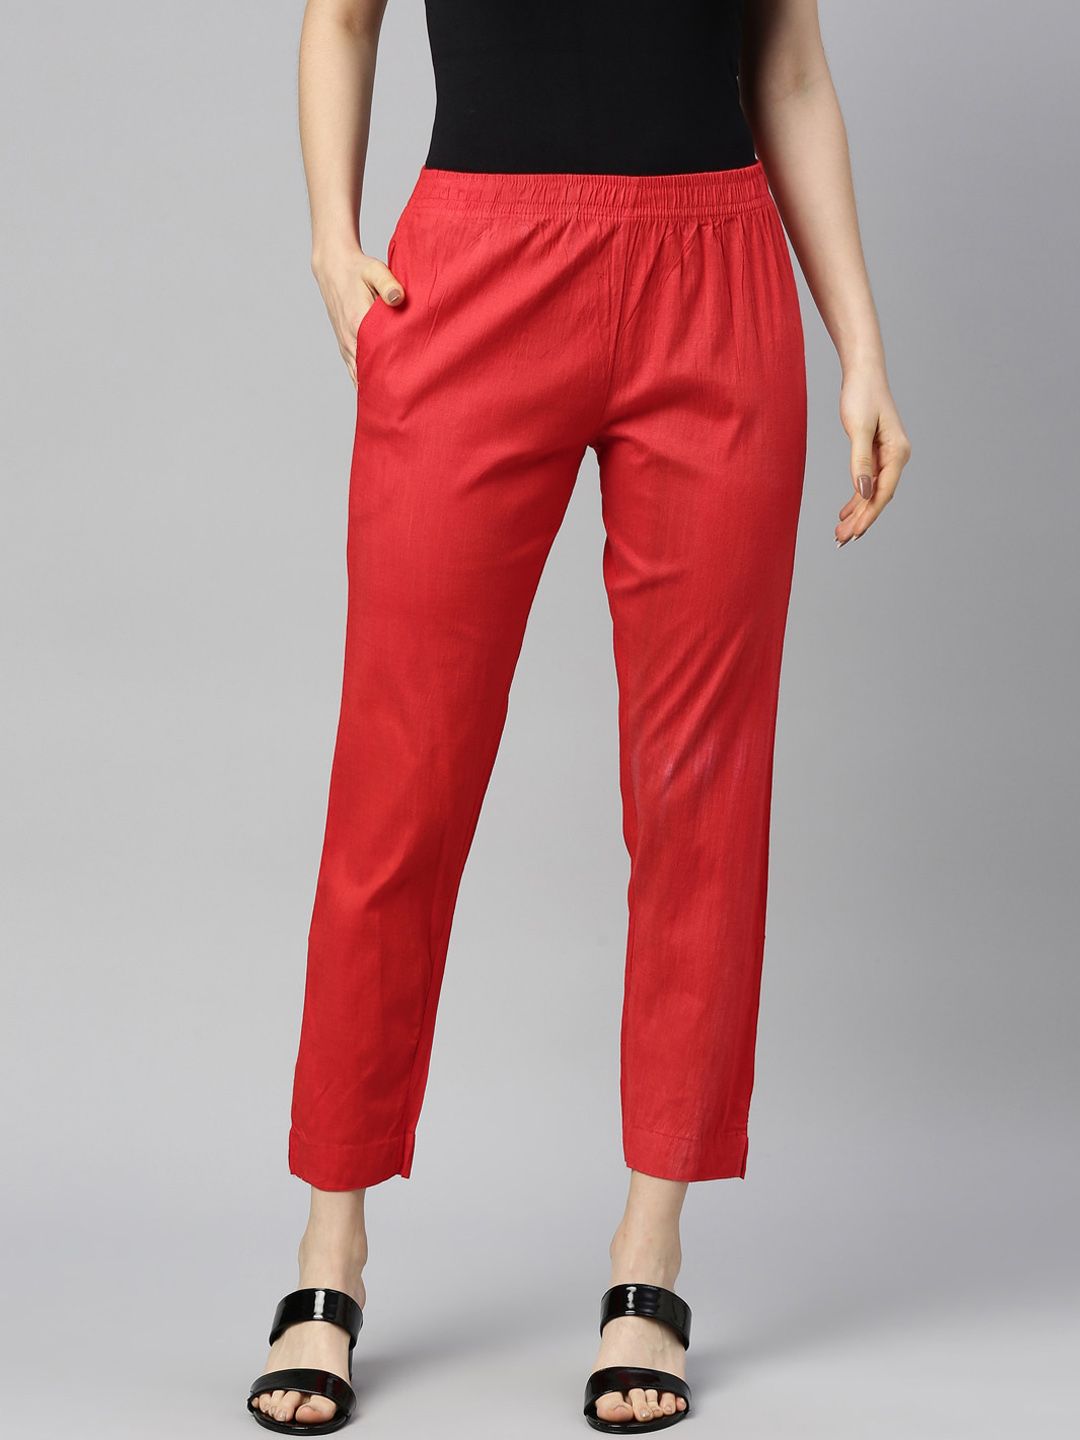 GOLDSTROMS Women Red Trousers Price in India